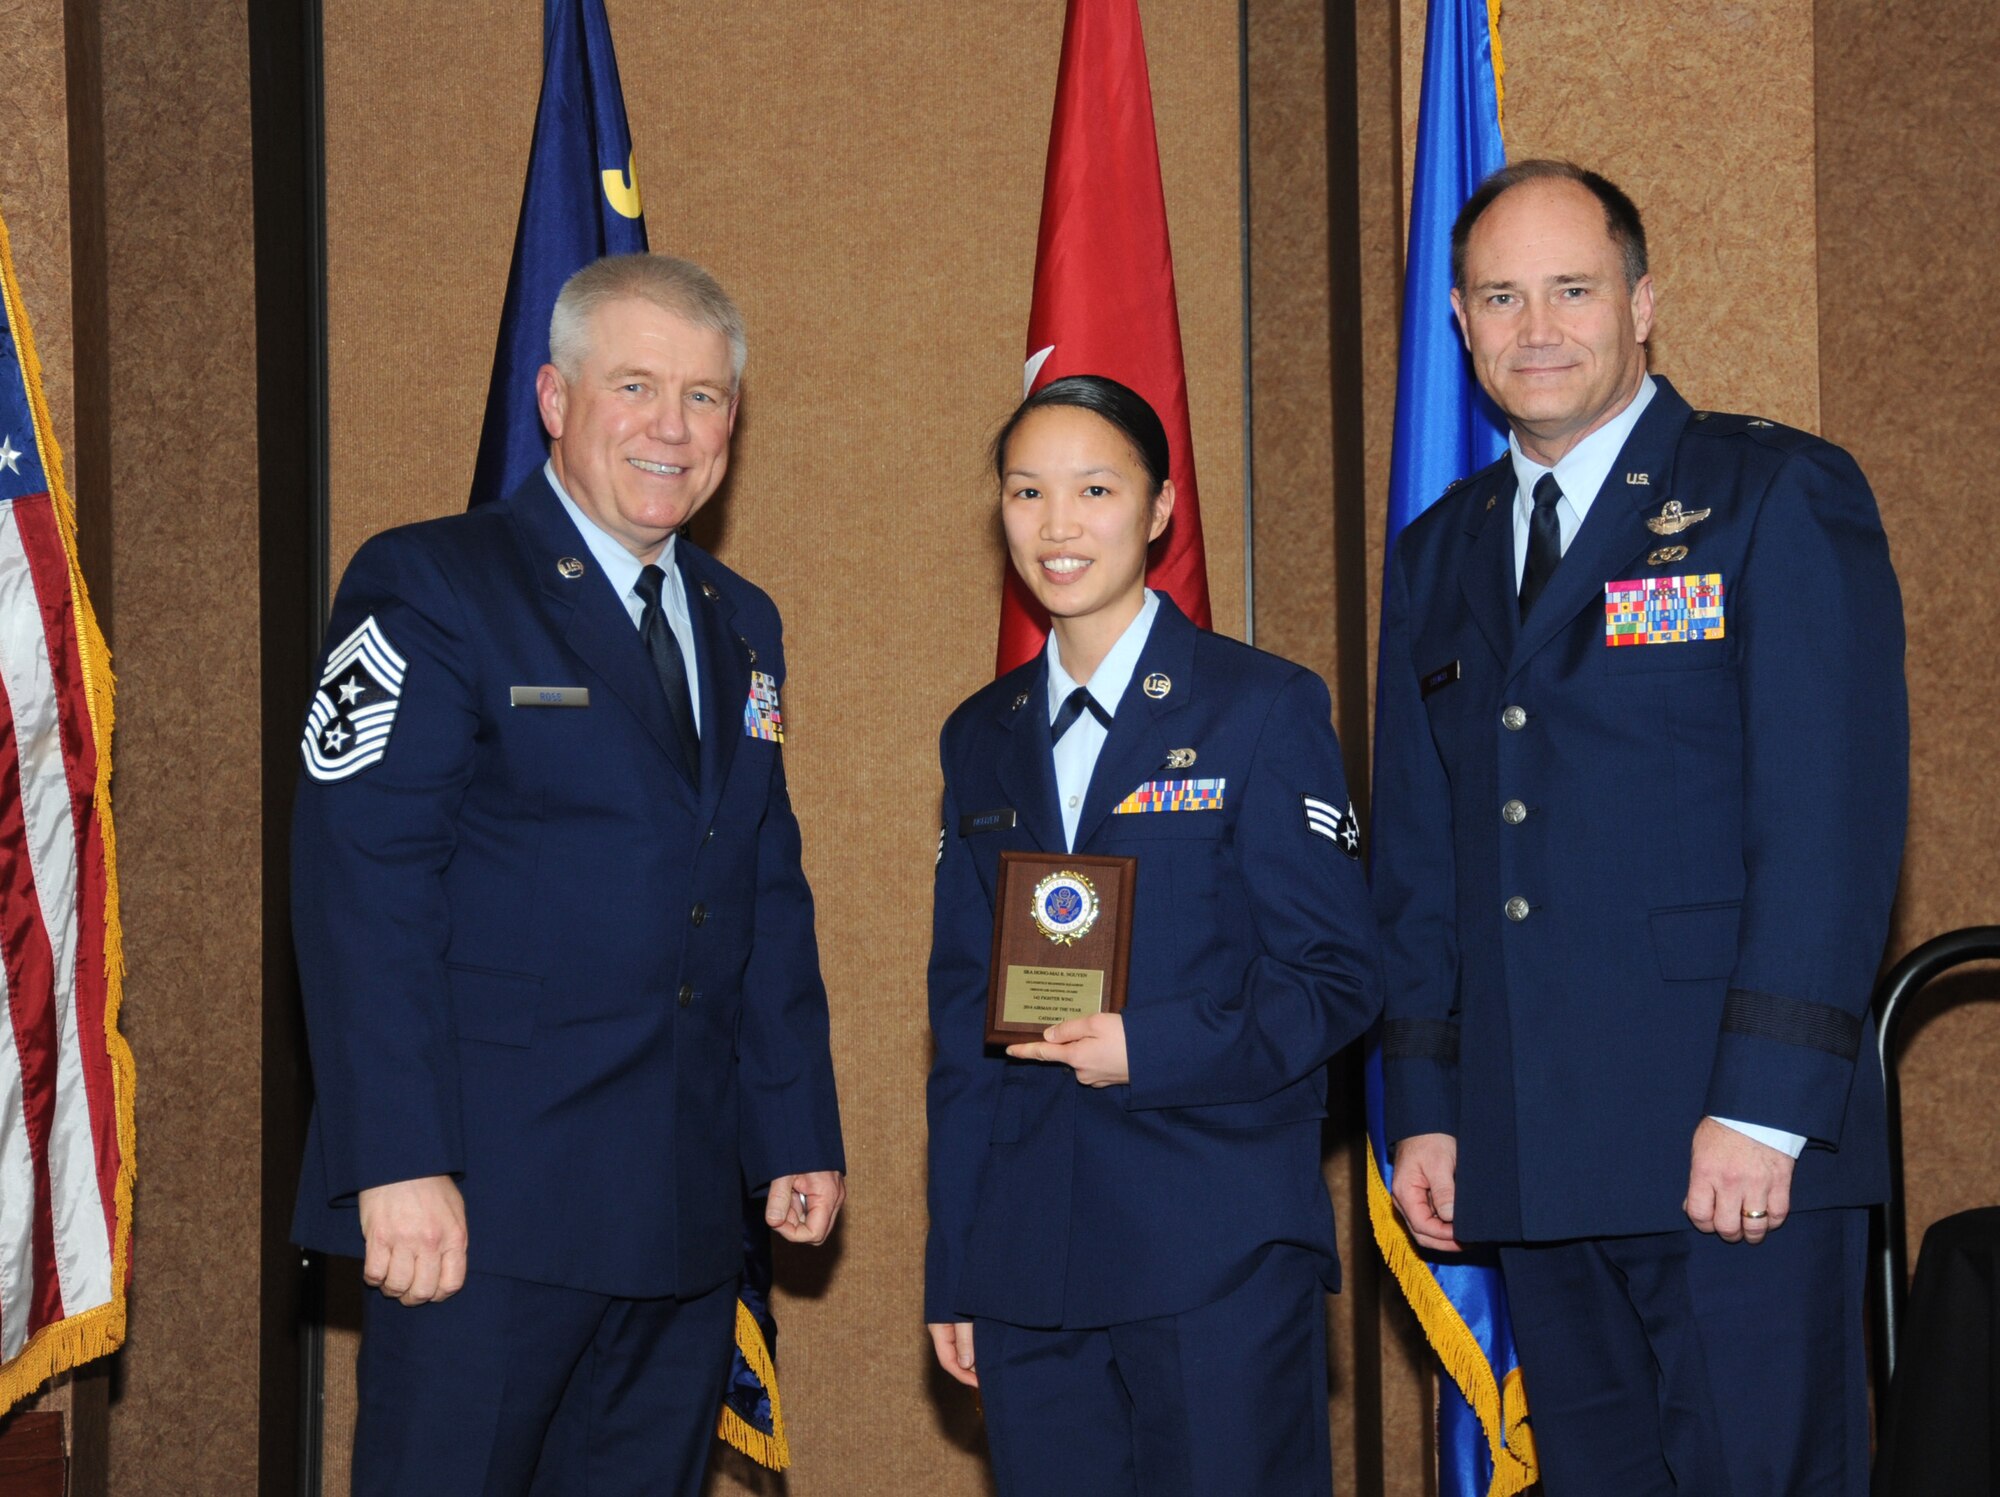 Oregon Air National Guard Senior Airman Hongmai Nguyen, center, is presented with the overall 142nd Fighter Wing Airman of the Year Award for Category I, from 173rd Fighter Wing Command Chief Master Sgt. Danny Ross, left, and Air Component Commander Brig. Gen. Michael Stencel, right, during the 21st Annual Oregon Air National Guard Awards Banquet, March 14, 2015, Portland, Ore. (U.S. Air National Guard photo by Tech. Sgt. Emily Thompson, 142nd Fighter Wing Public Affairs/Released)